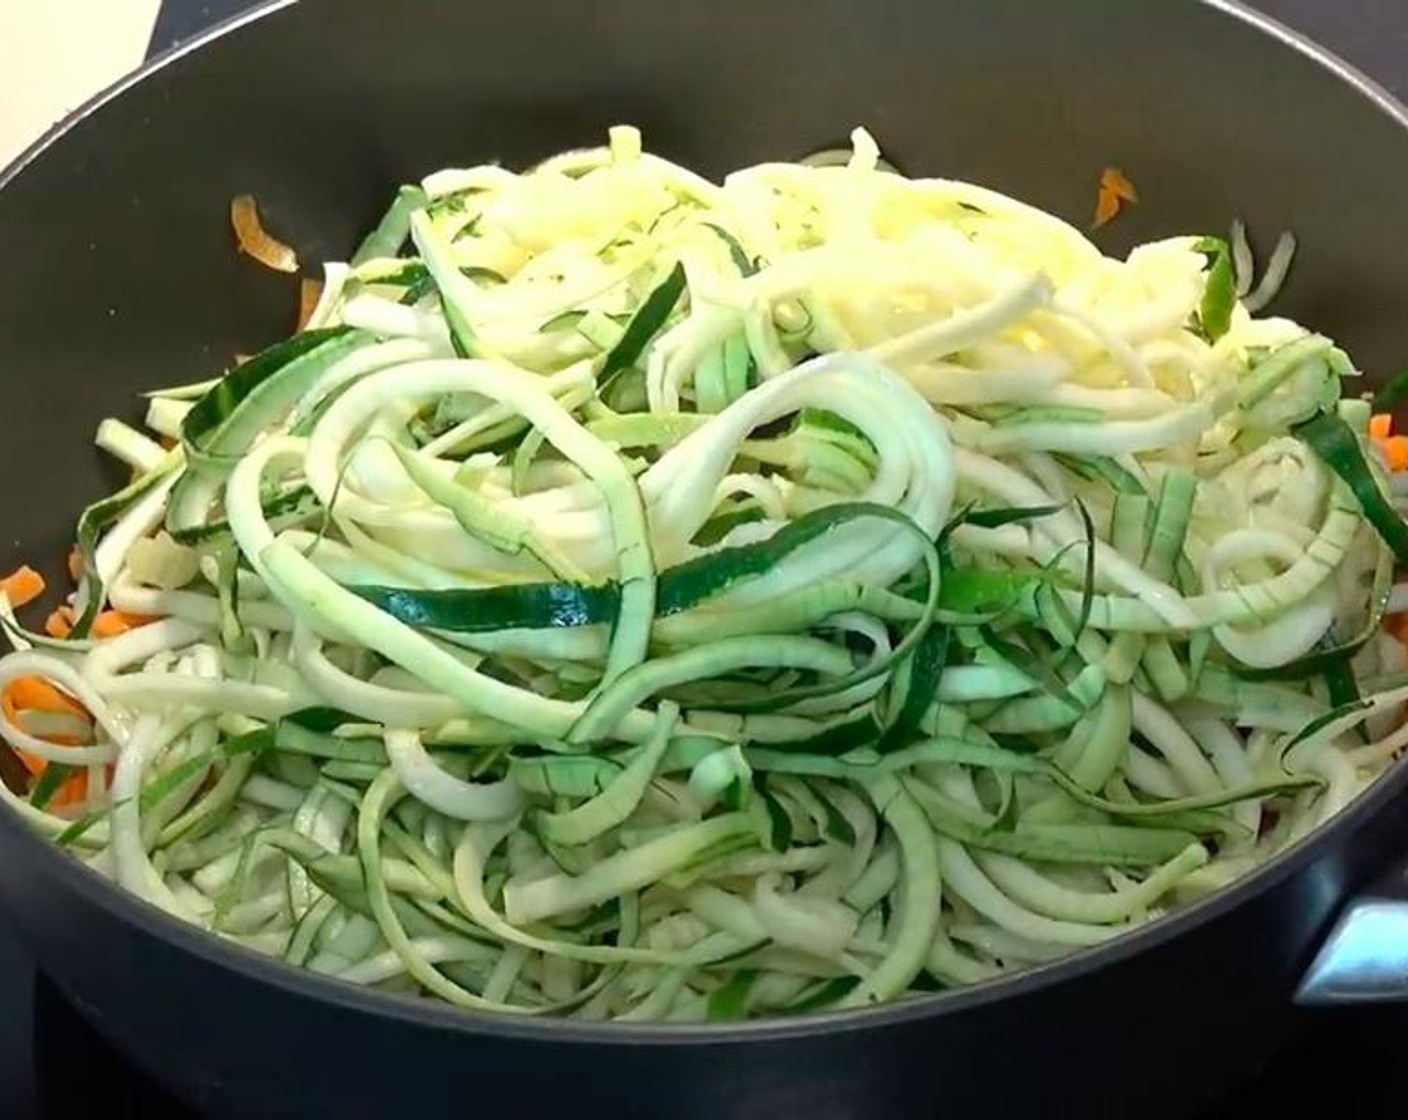 step 4 Add in the spiralized zucchini. Toss the mix lightly until everything is combined and the noodles are nice and tender. Then put the mix into a colander to drain for a few minutes.